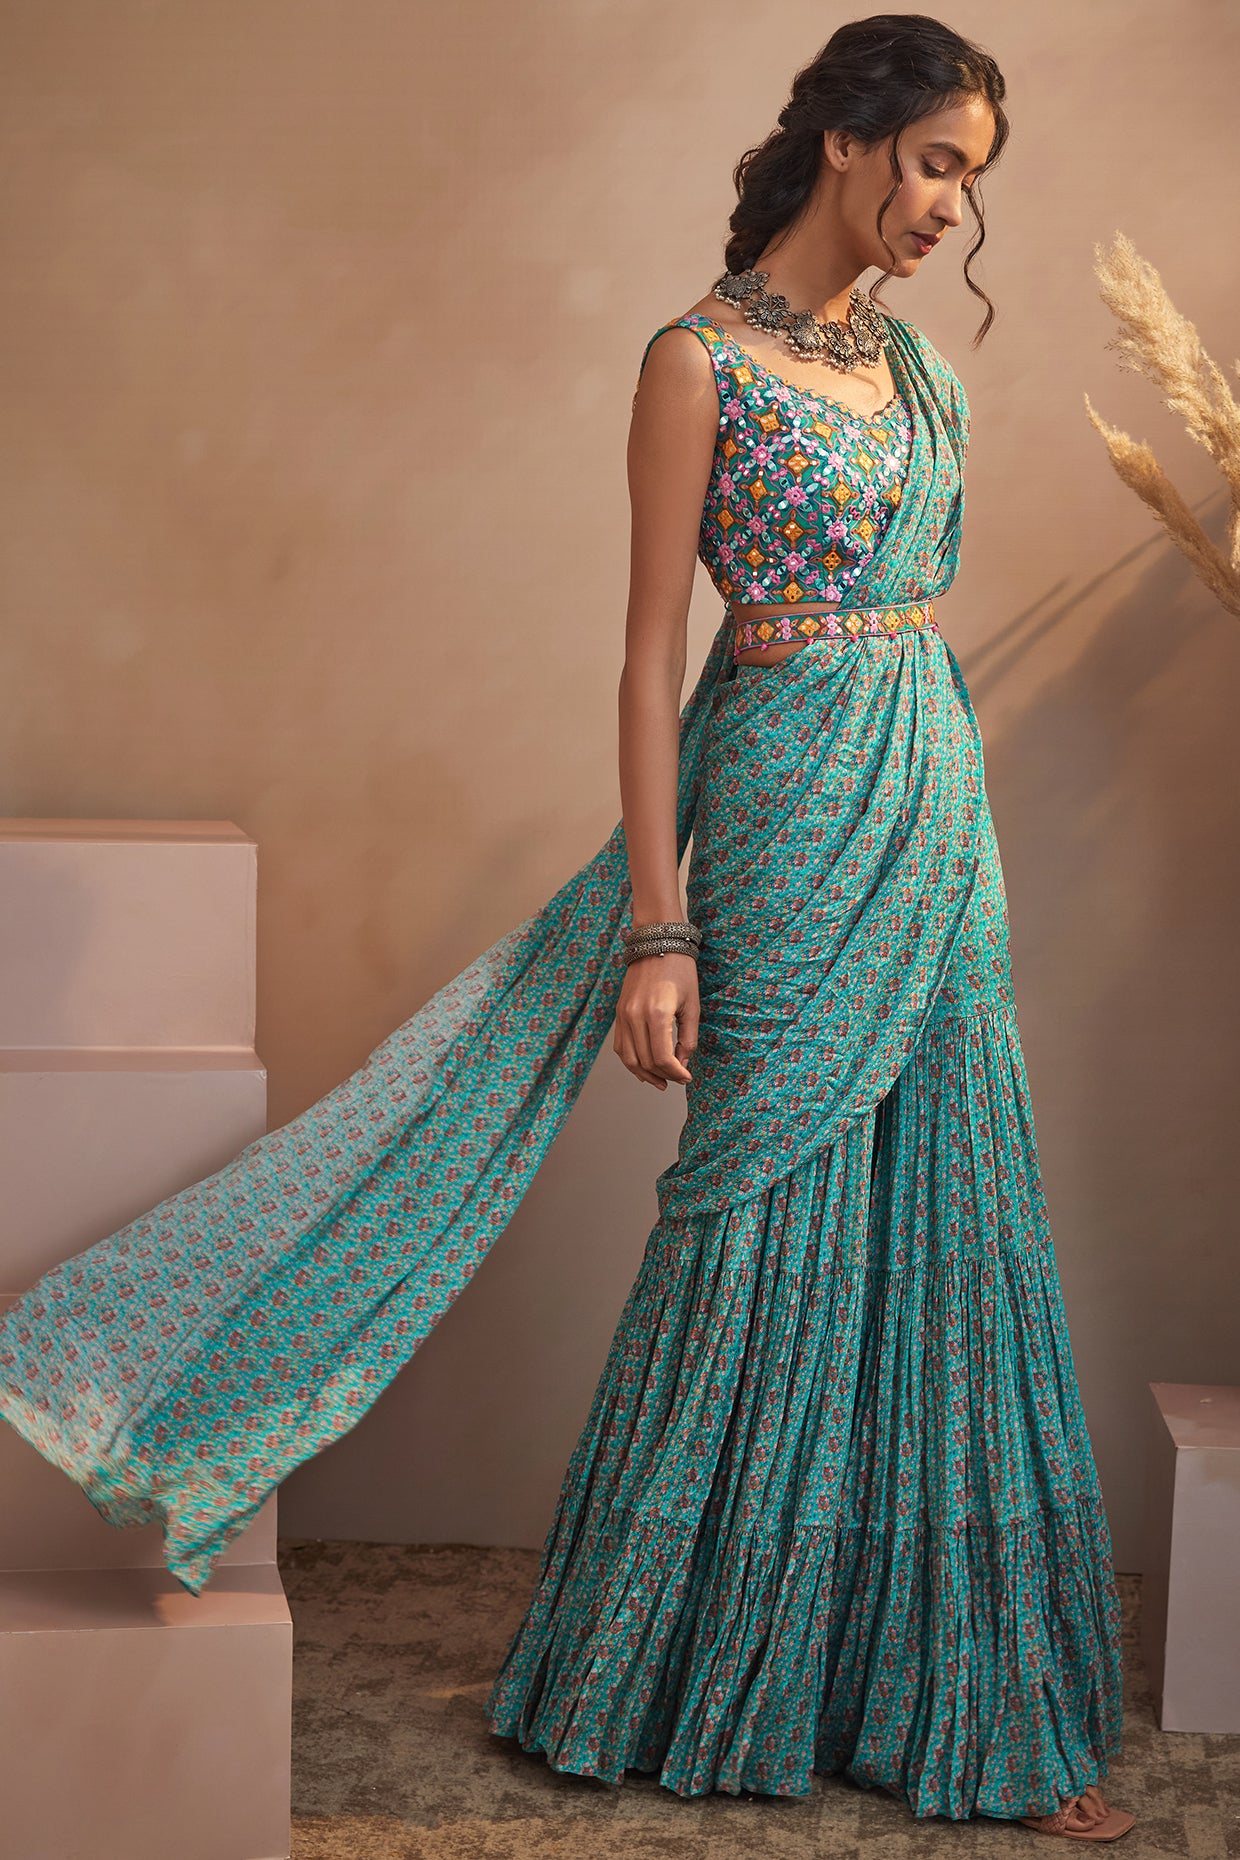 Pick These Indo-western Gowns by Manish Malhotra for Your D-day